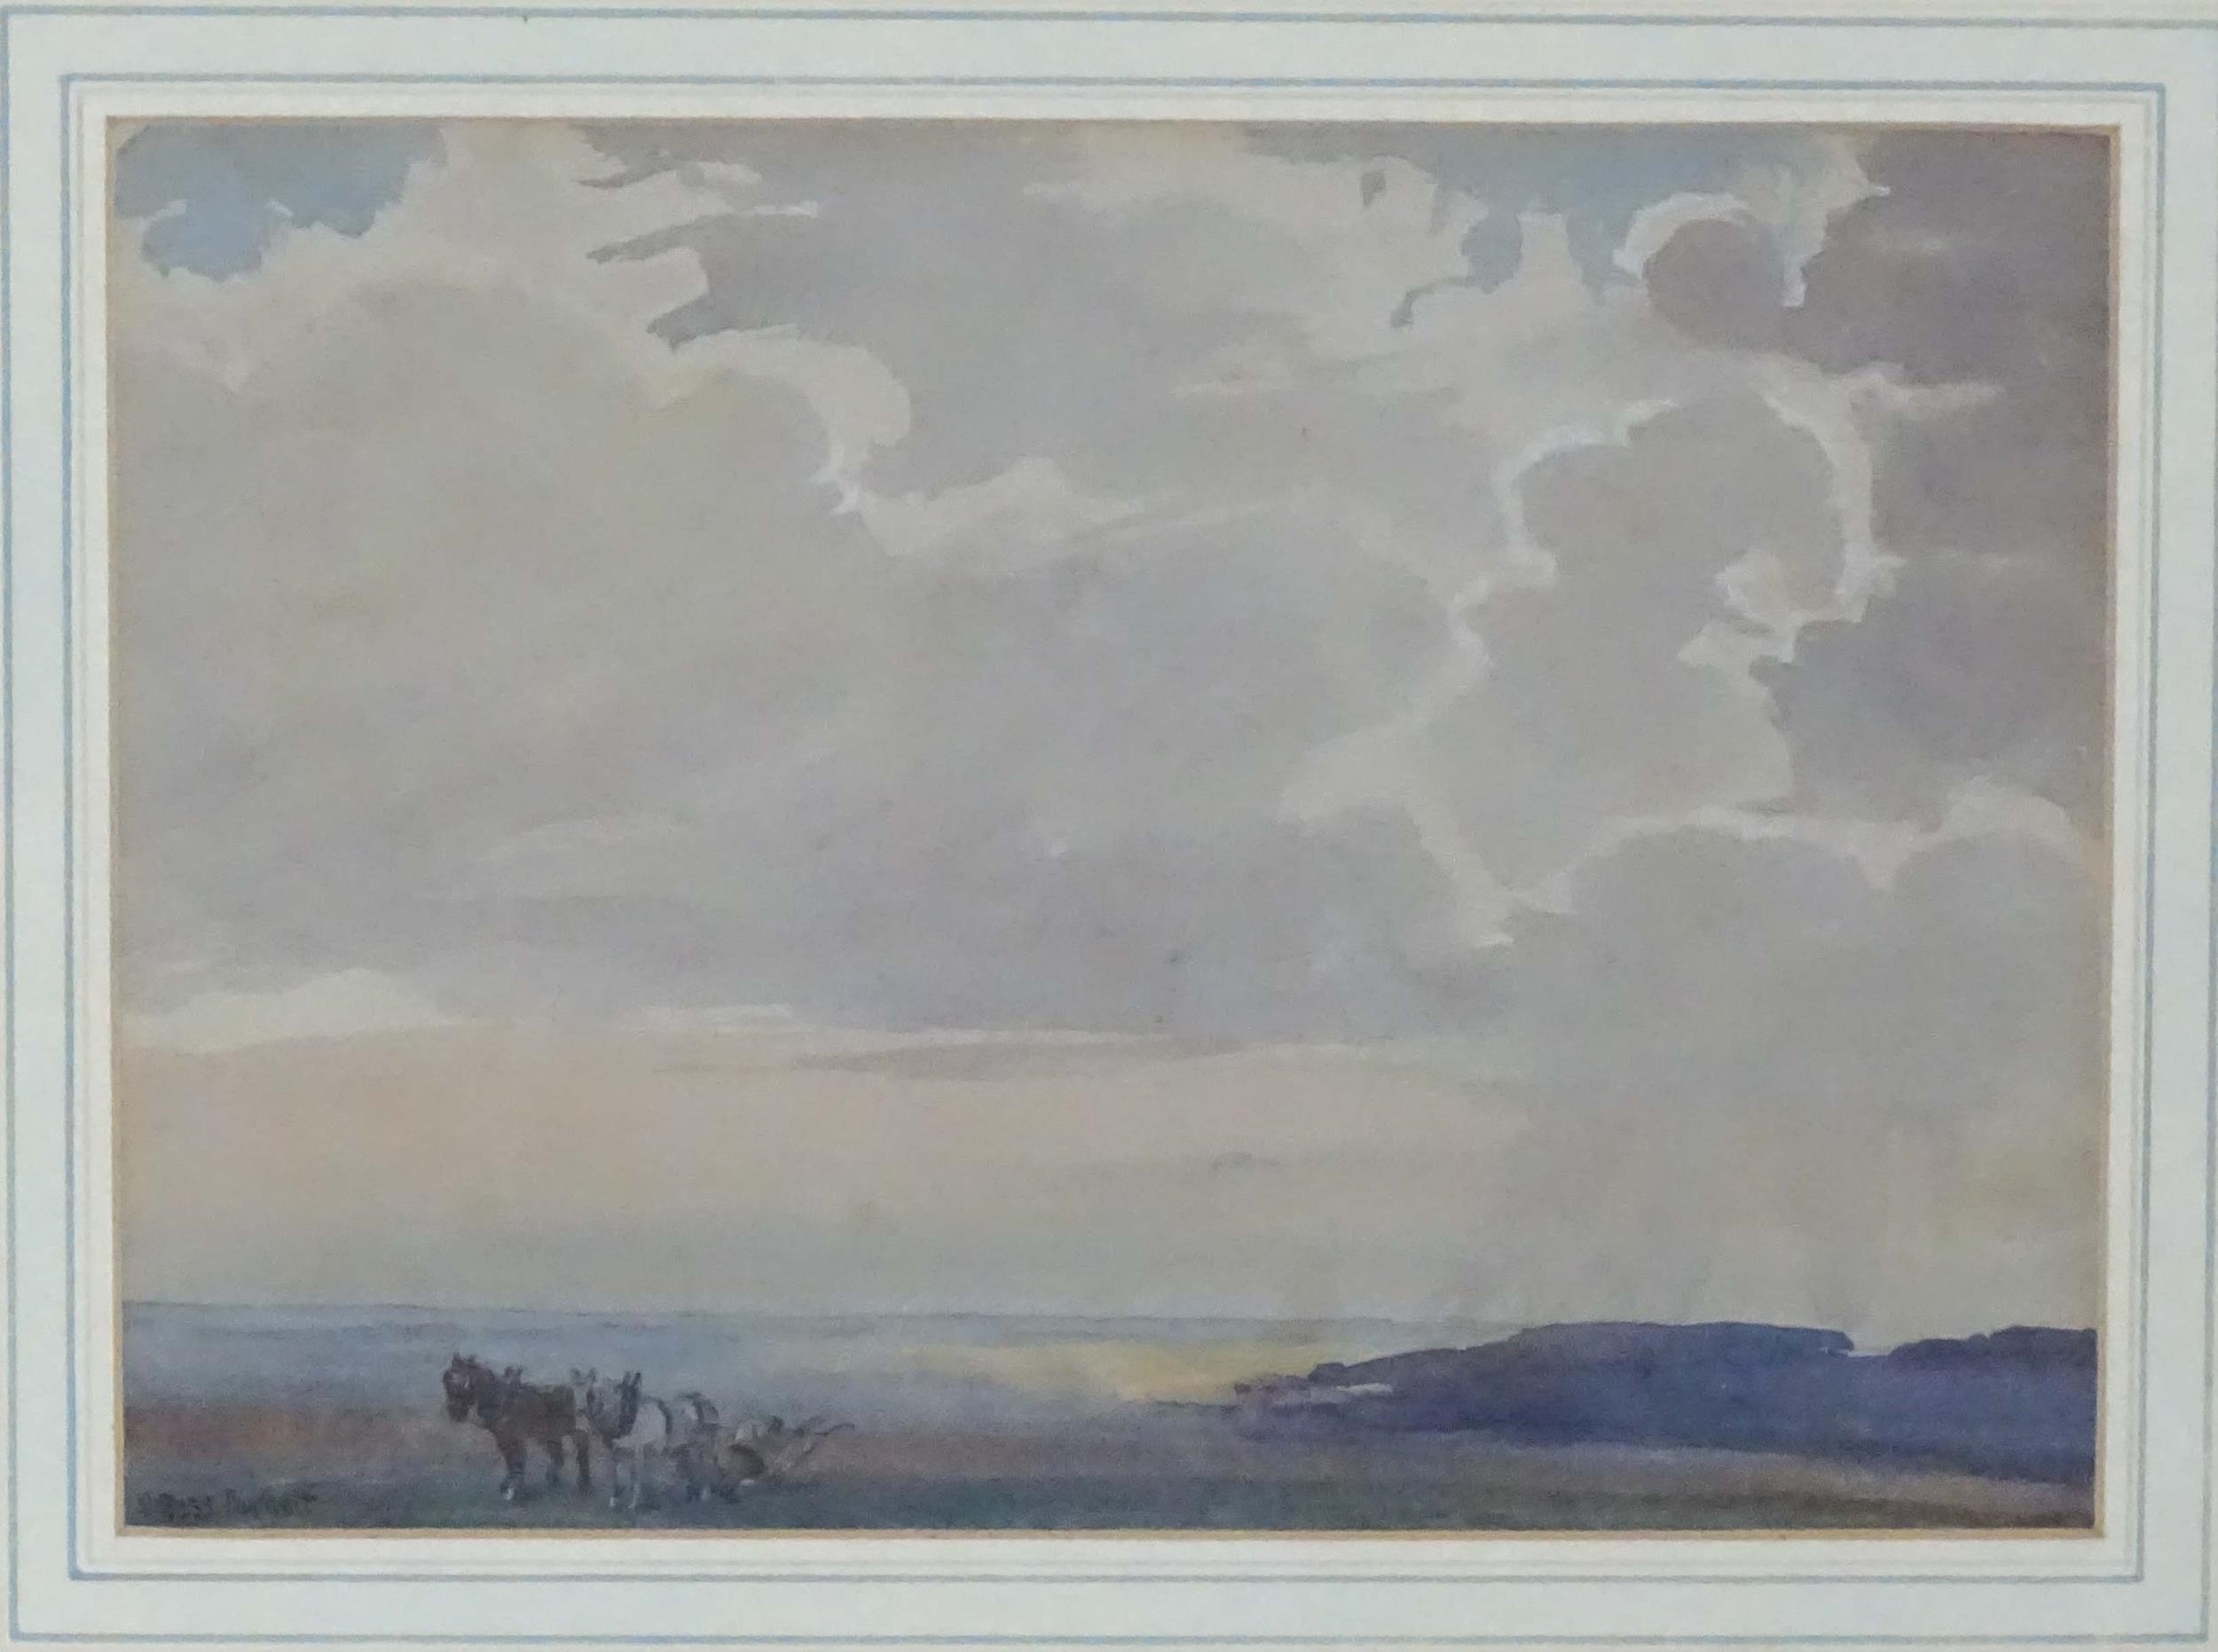 Cecil Ross Burnett (1872-1933), Watercolour, A coastal landscape with horses. Signed lower left. - Image 3 of 4